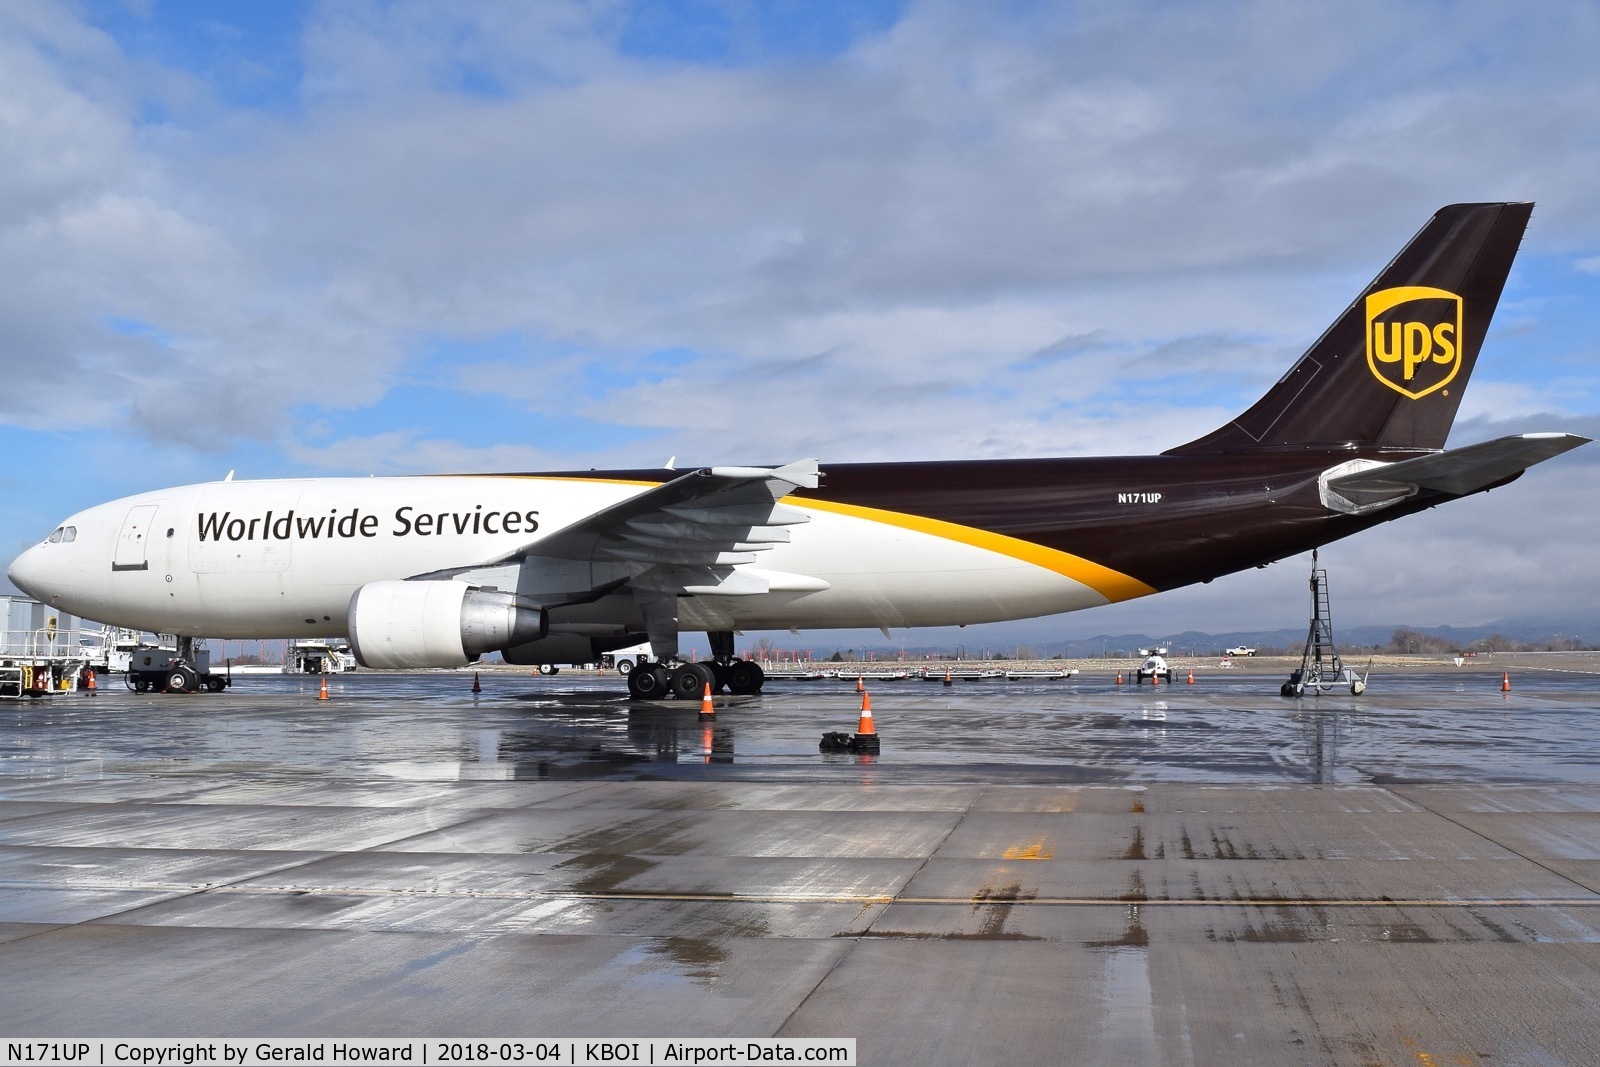 N171UP, 2006 Airbus A300F4-622R C/N 0866, Parked on the UPS ramp.